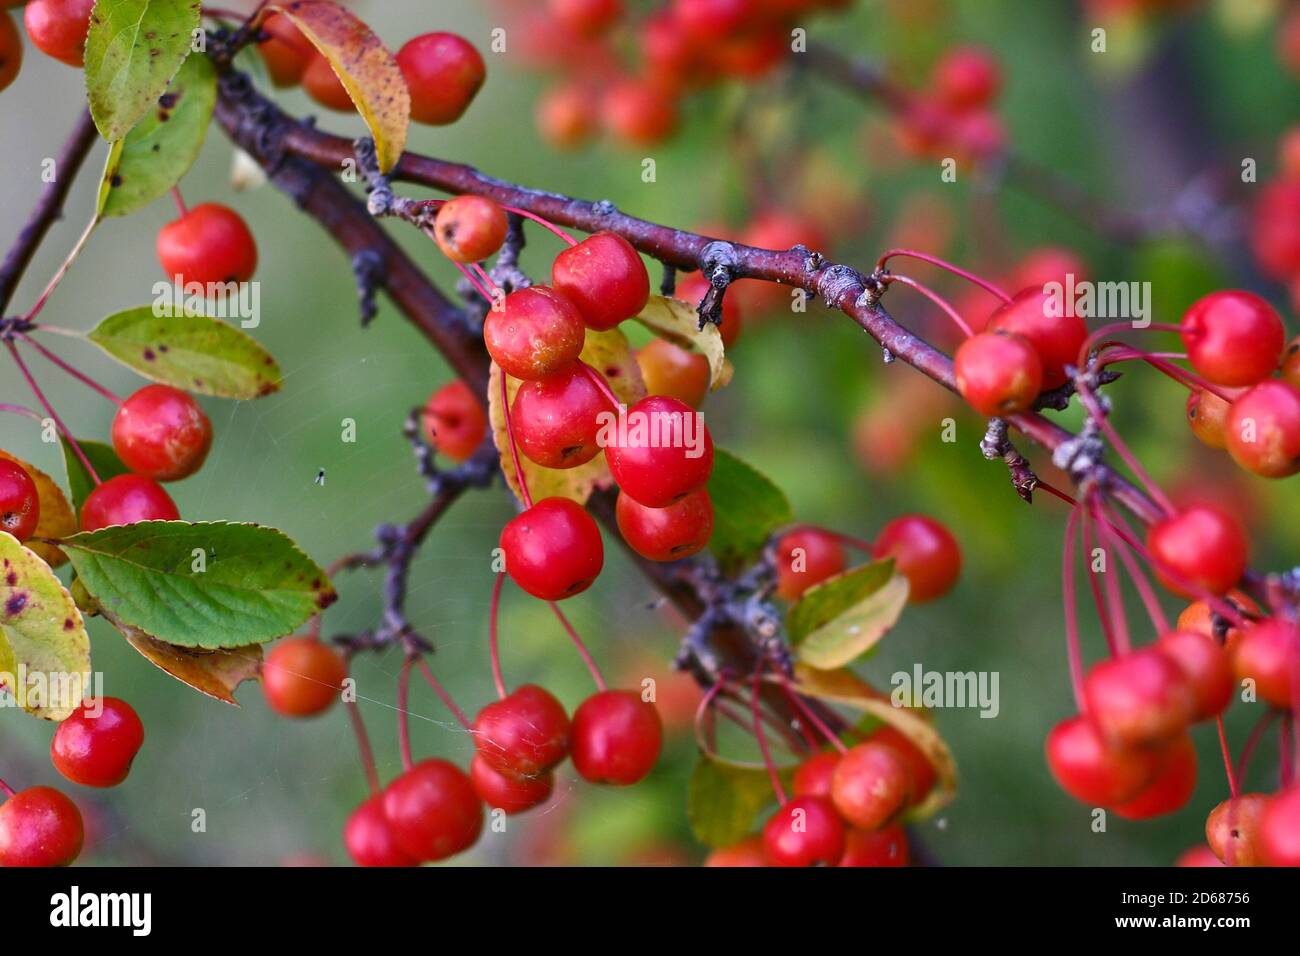 Small cherries on a tree Stock Photo